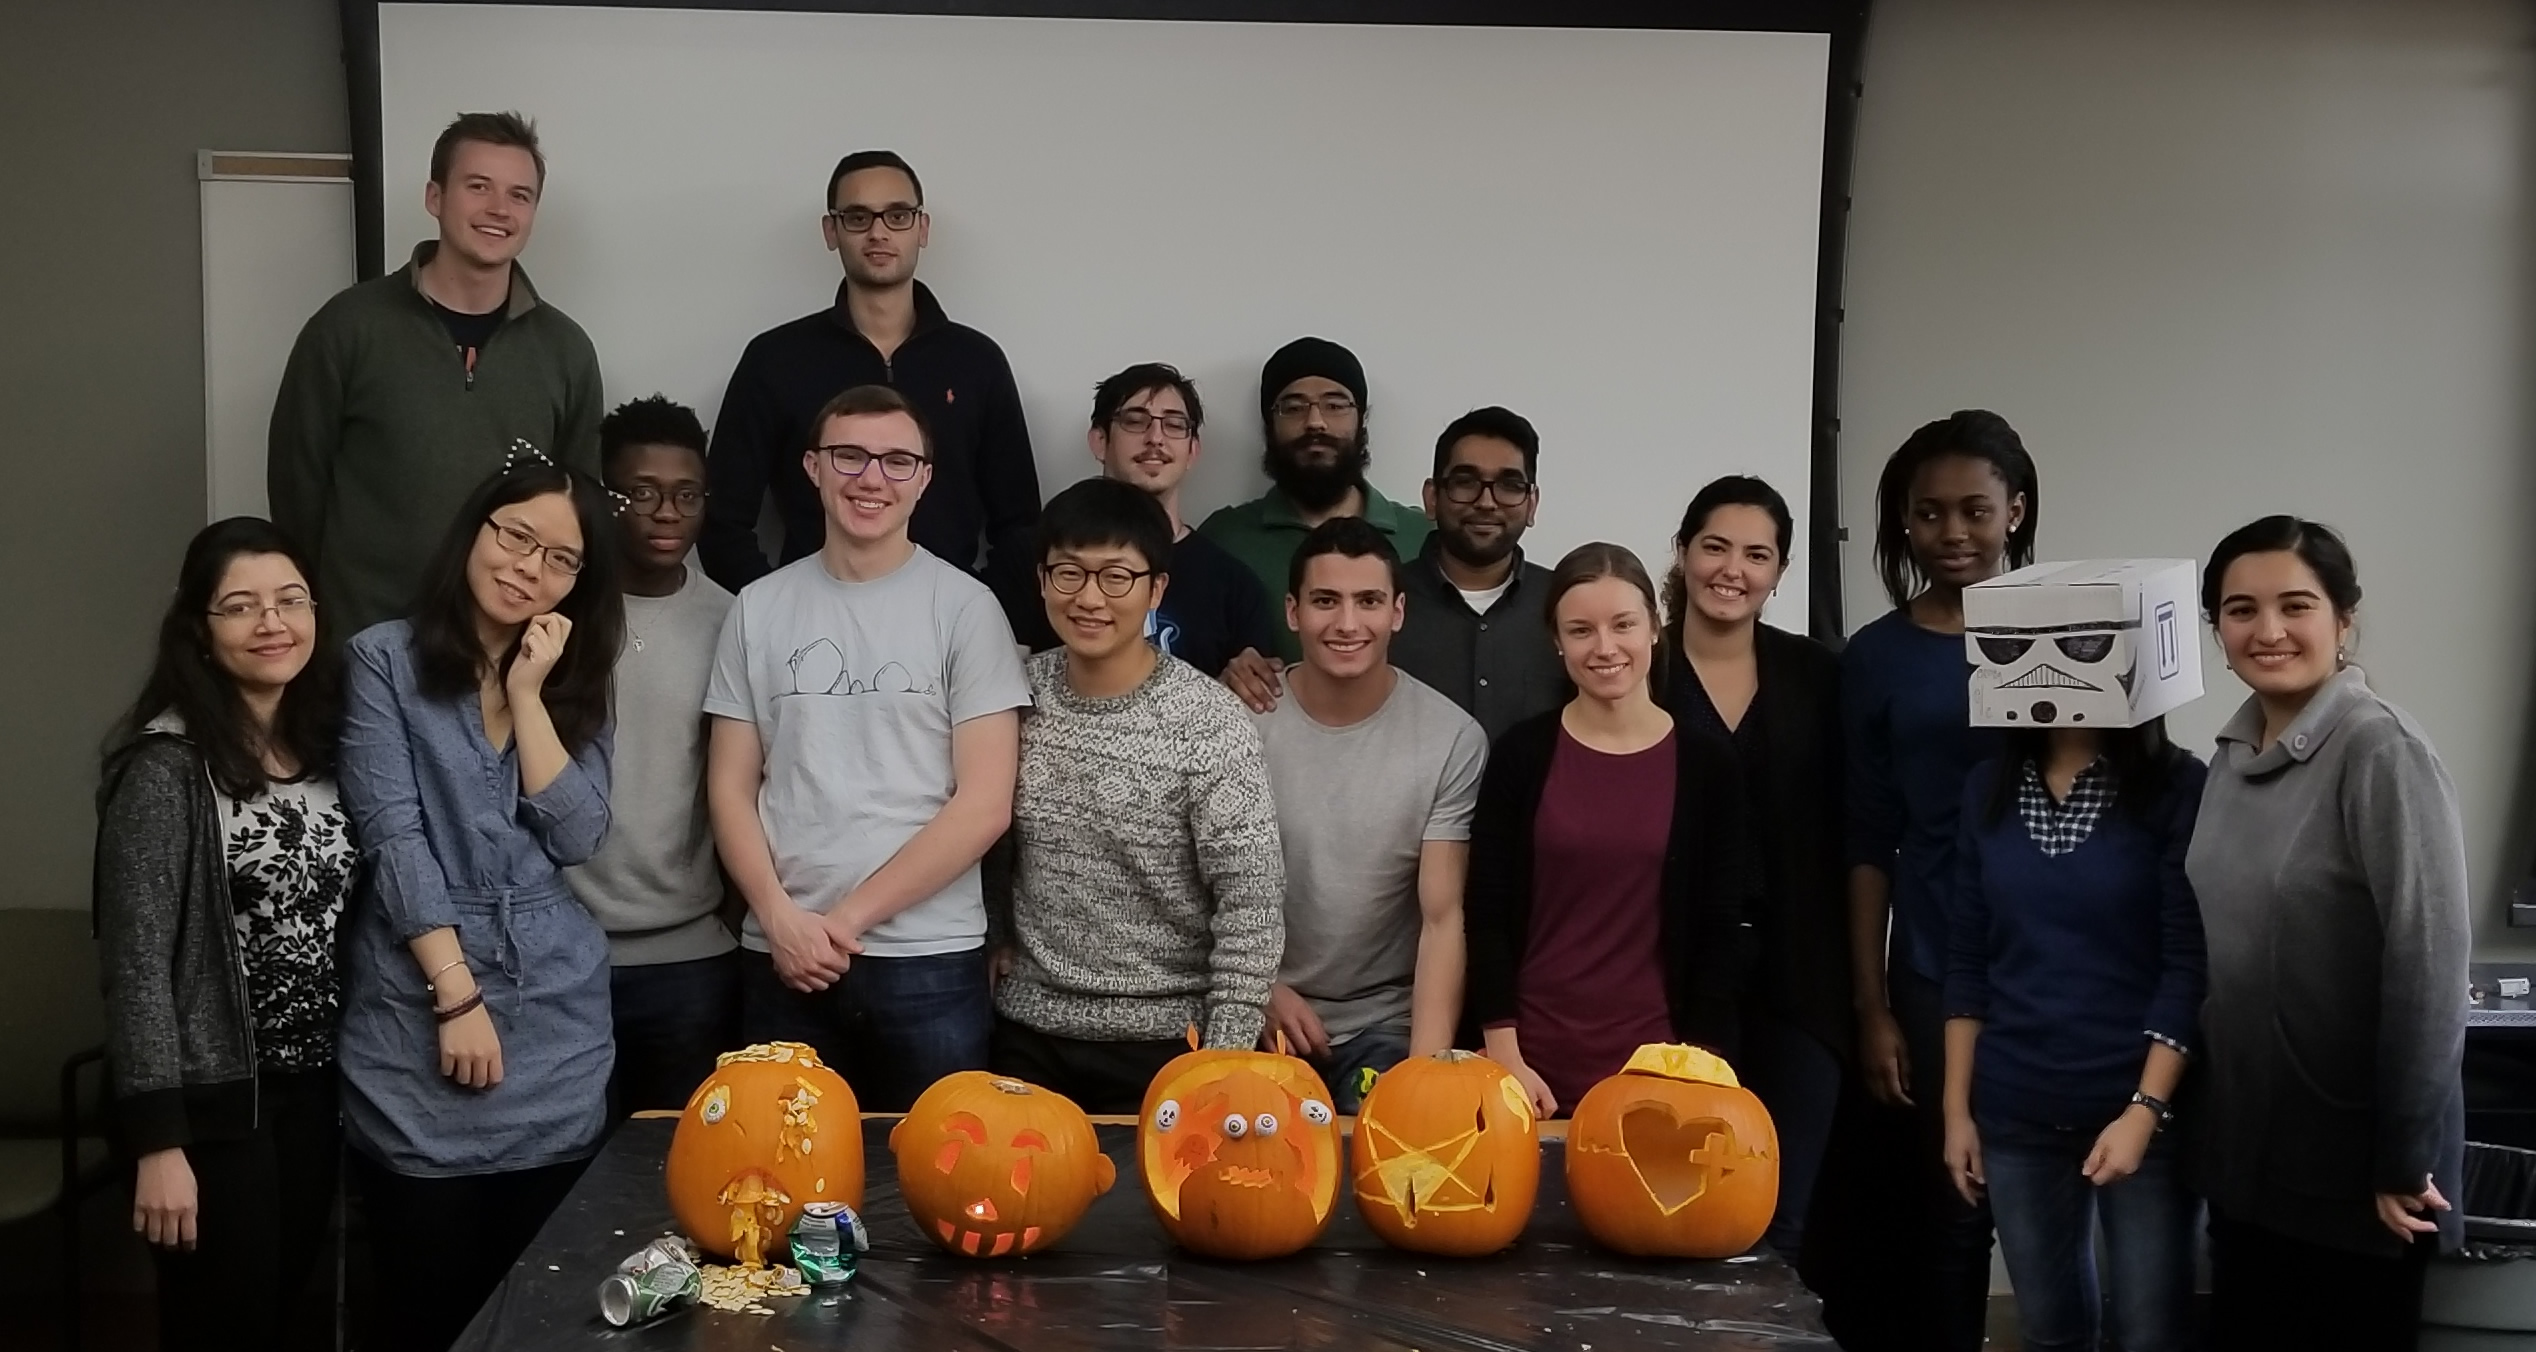 pumpkin carving event organized by bcgsa